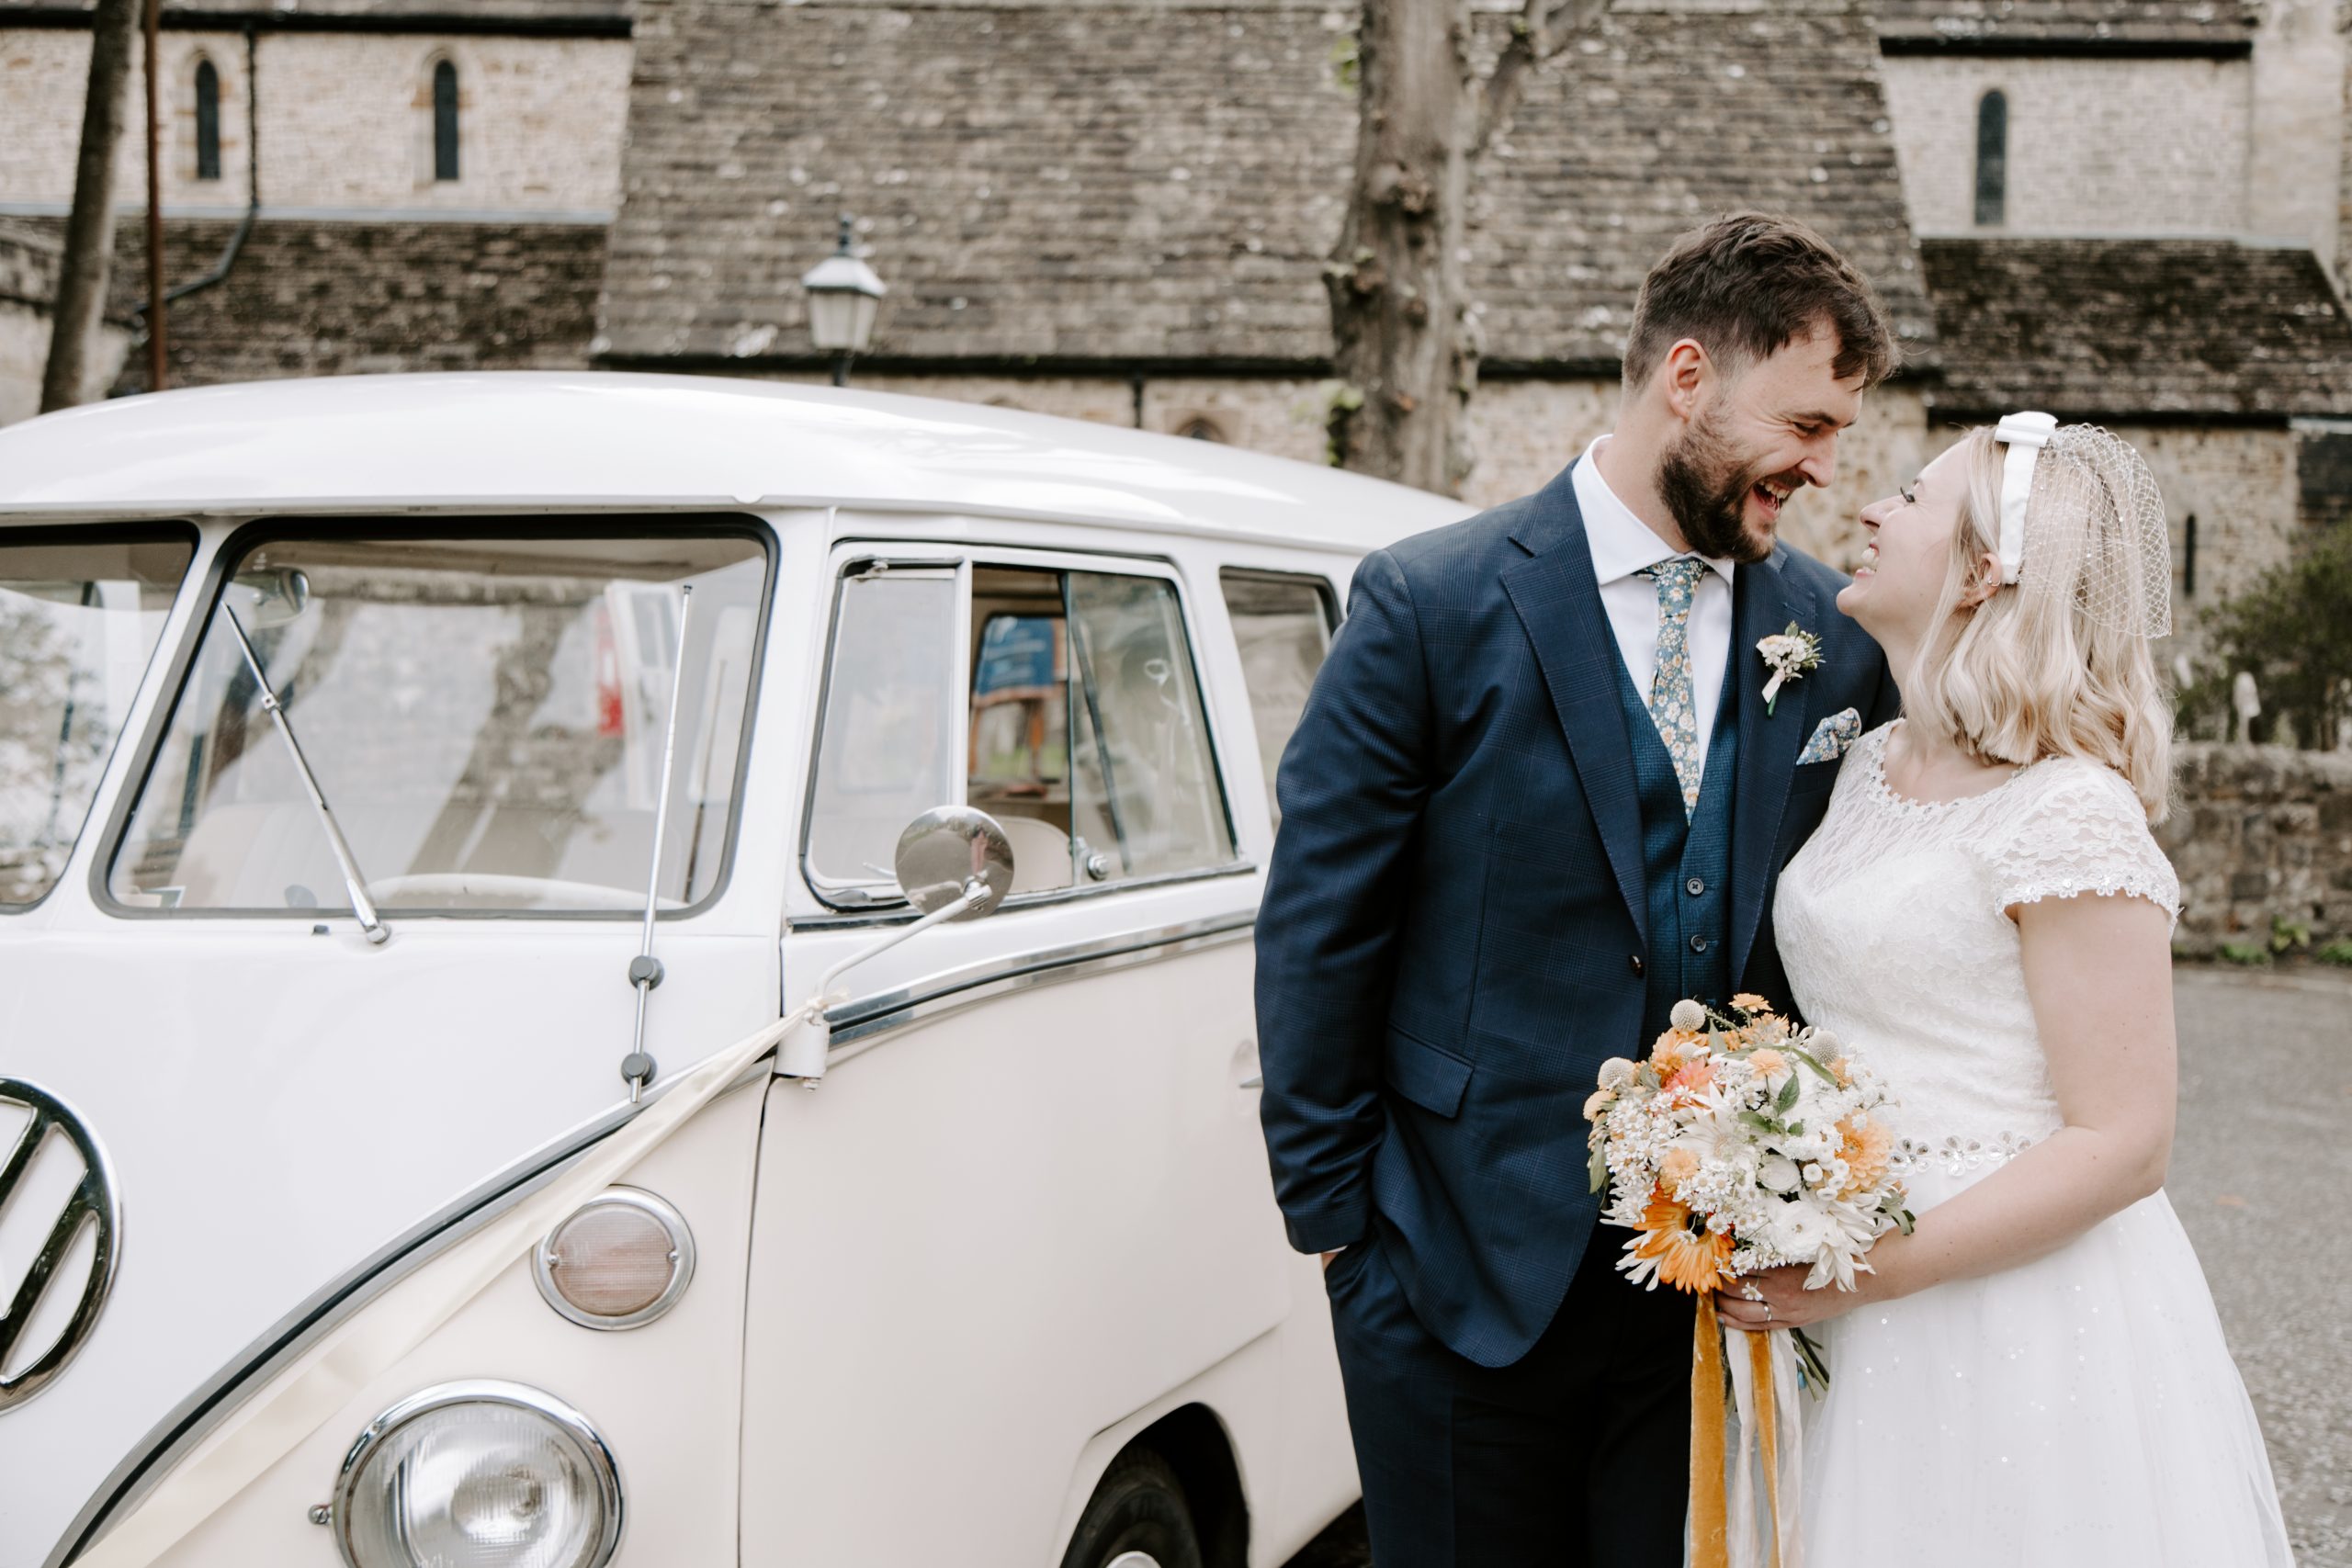 Bride and groom laughing in front of VW Campervan